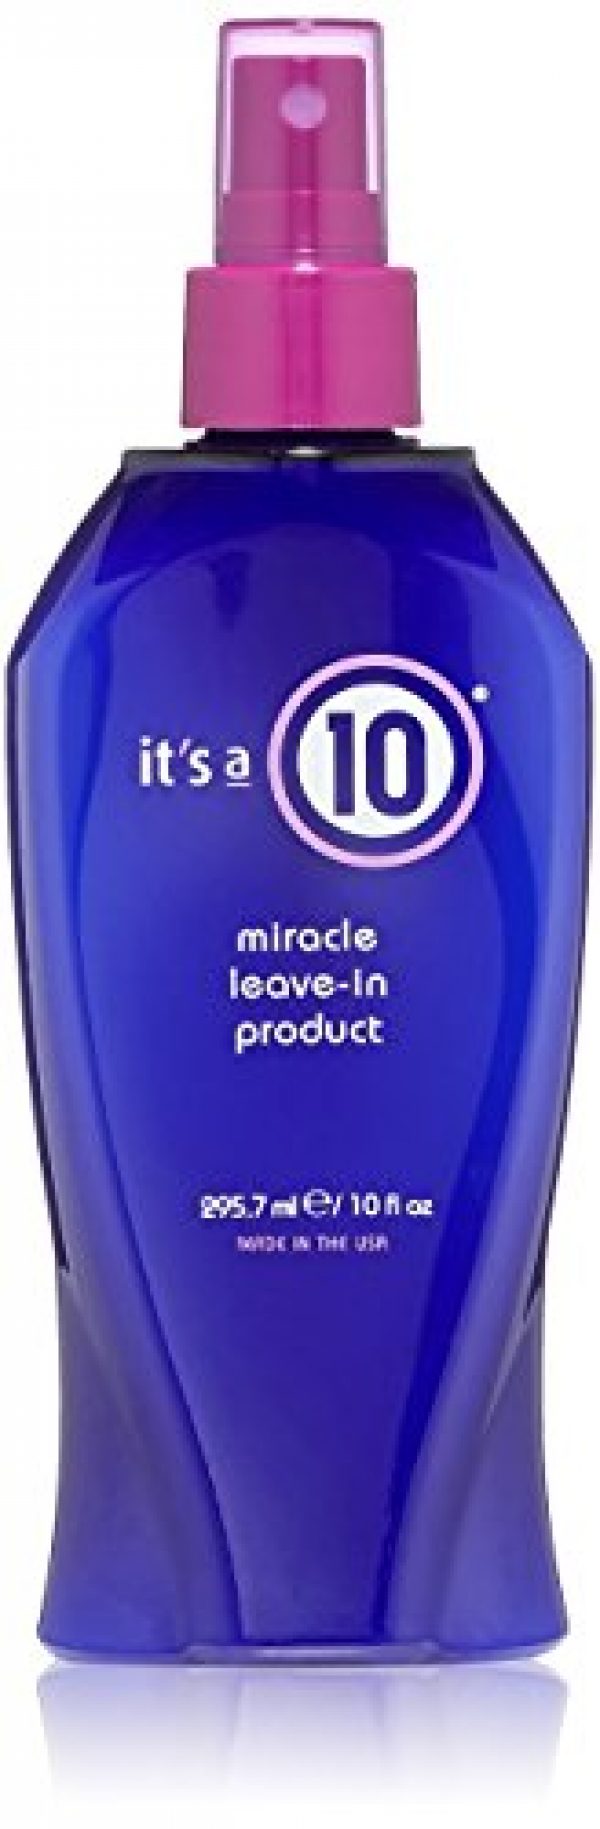 It's A 10 Haircare Miracle Leave-In Conditioner Spray - 10 oz. - 1ct 15